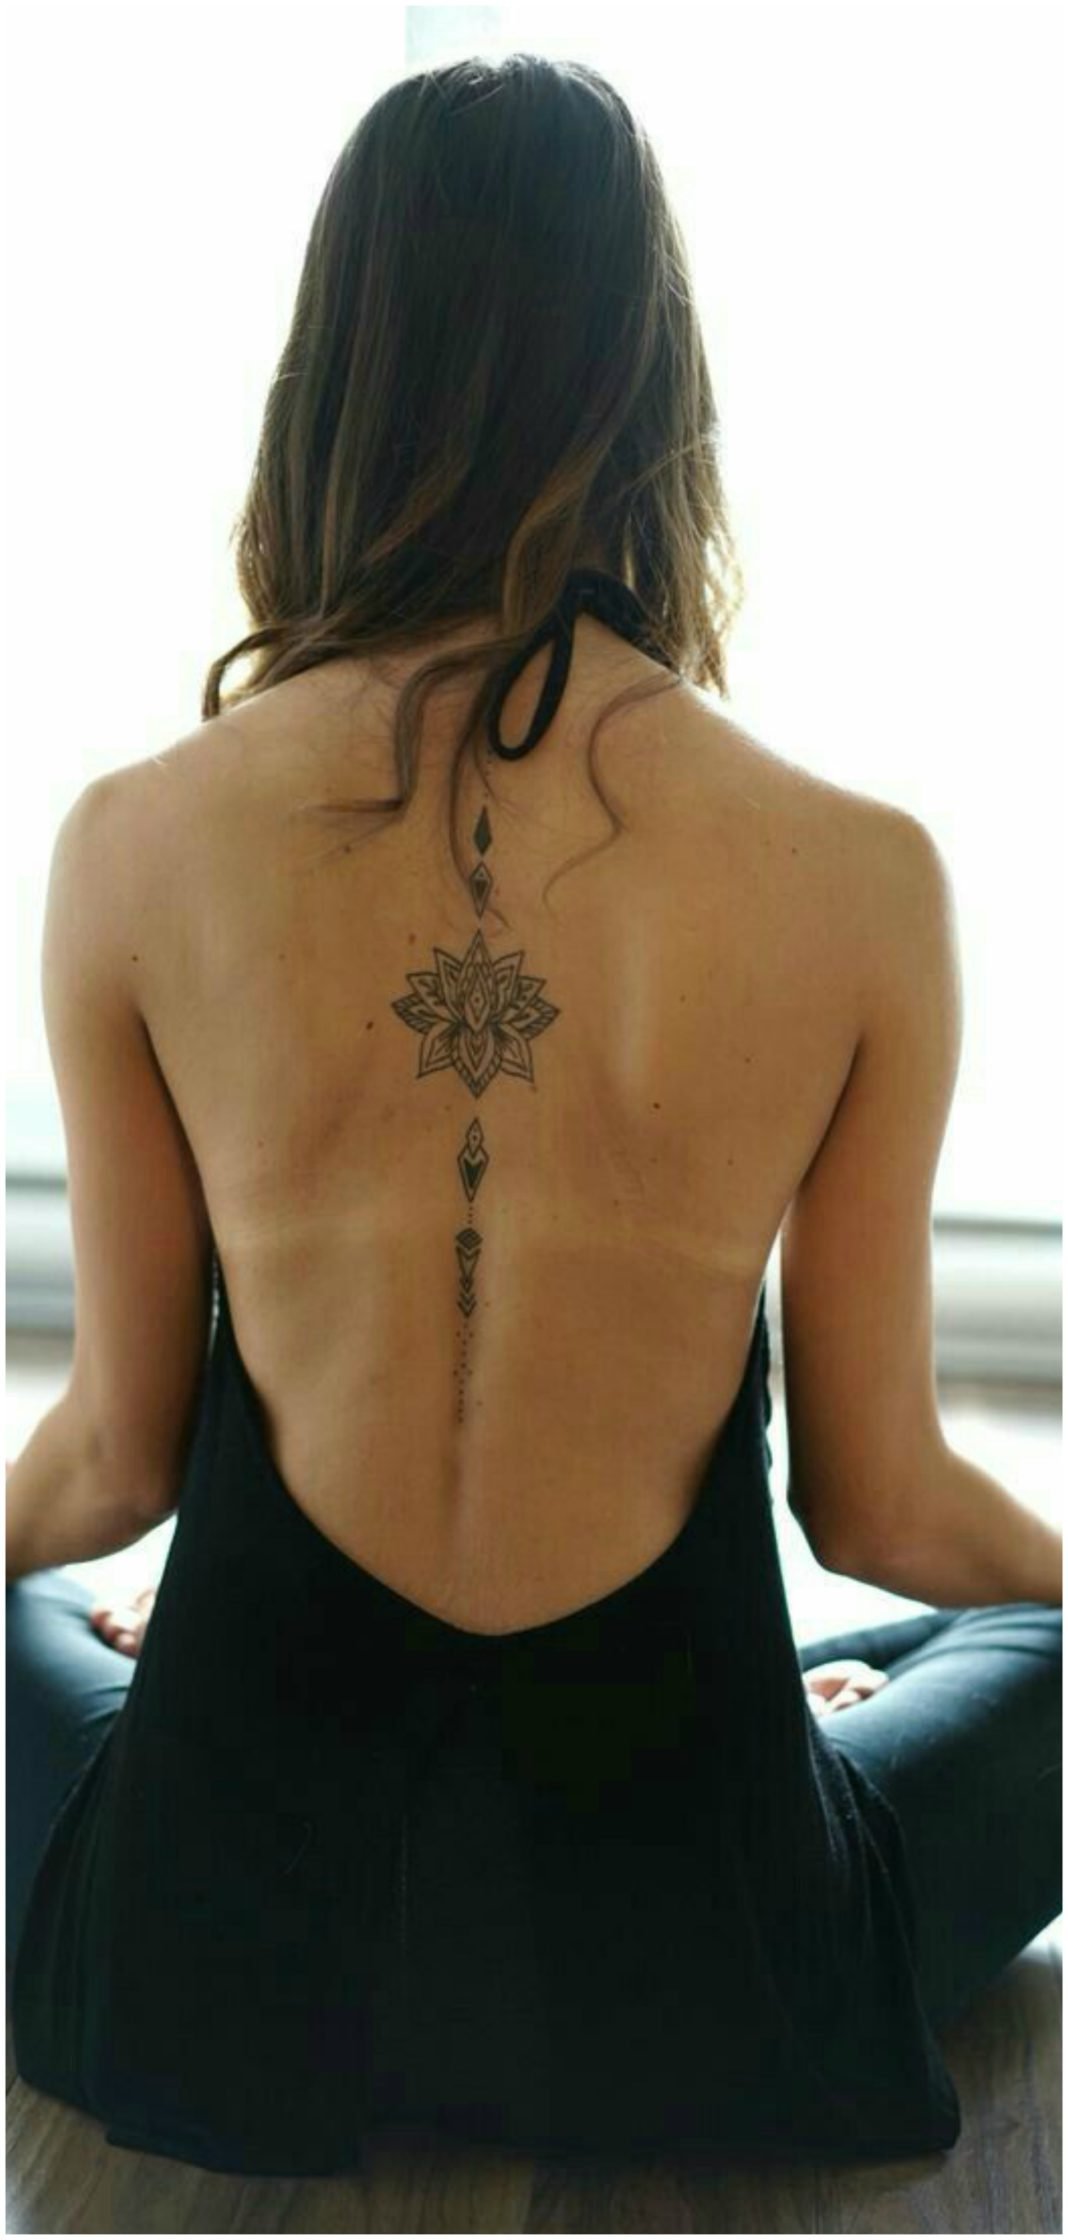 20 Spine Tattoo Ideas For Women To Flaunt · Beautifulfeed 